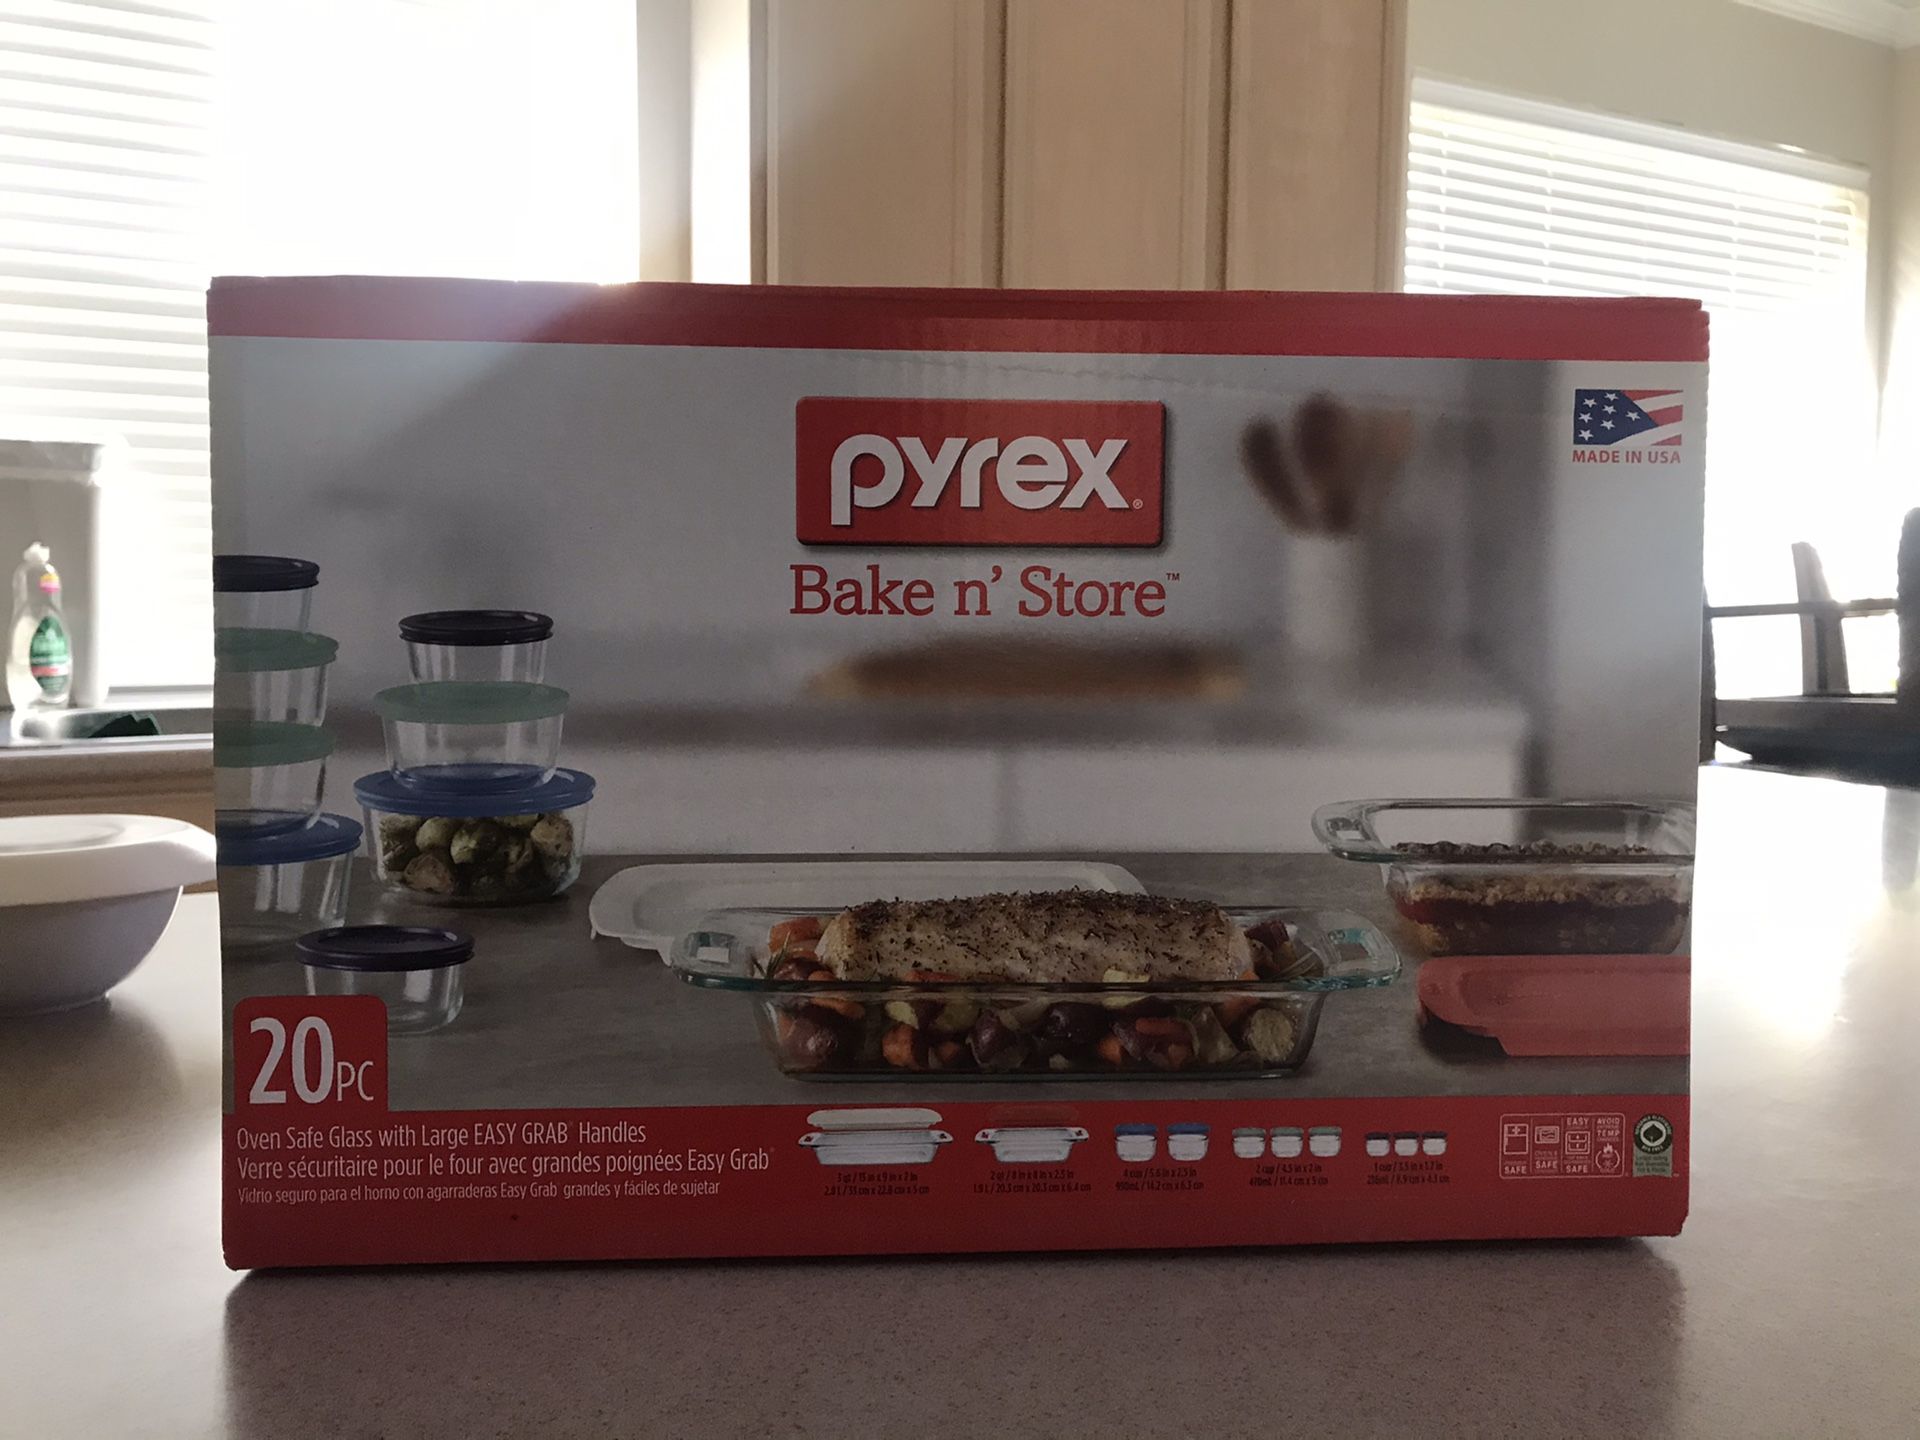 Pyrex Bake N’ Store - 20pc NEVER OPENED BRAND NEW